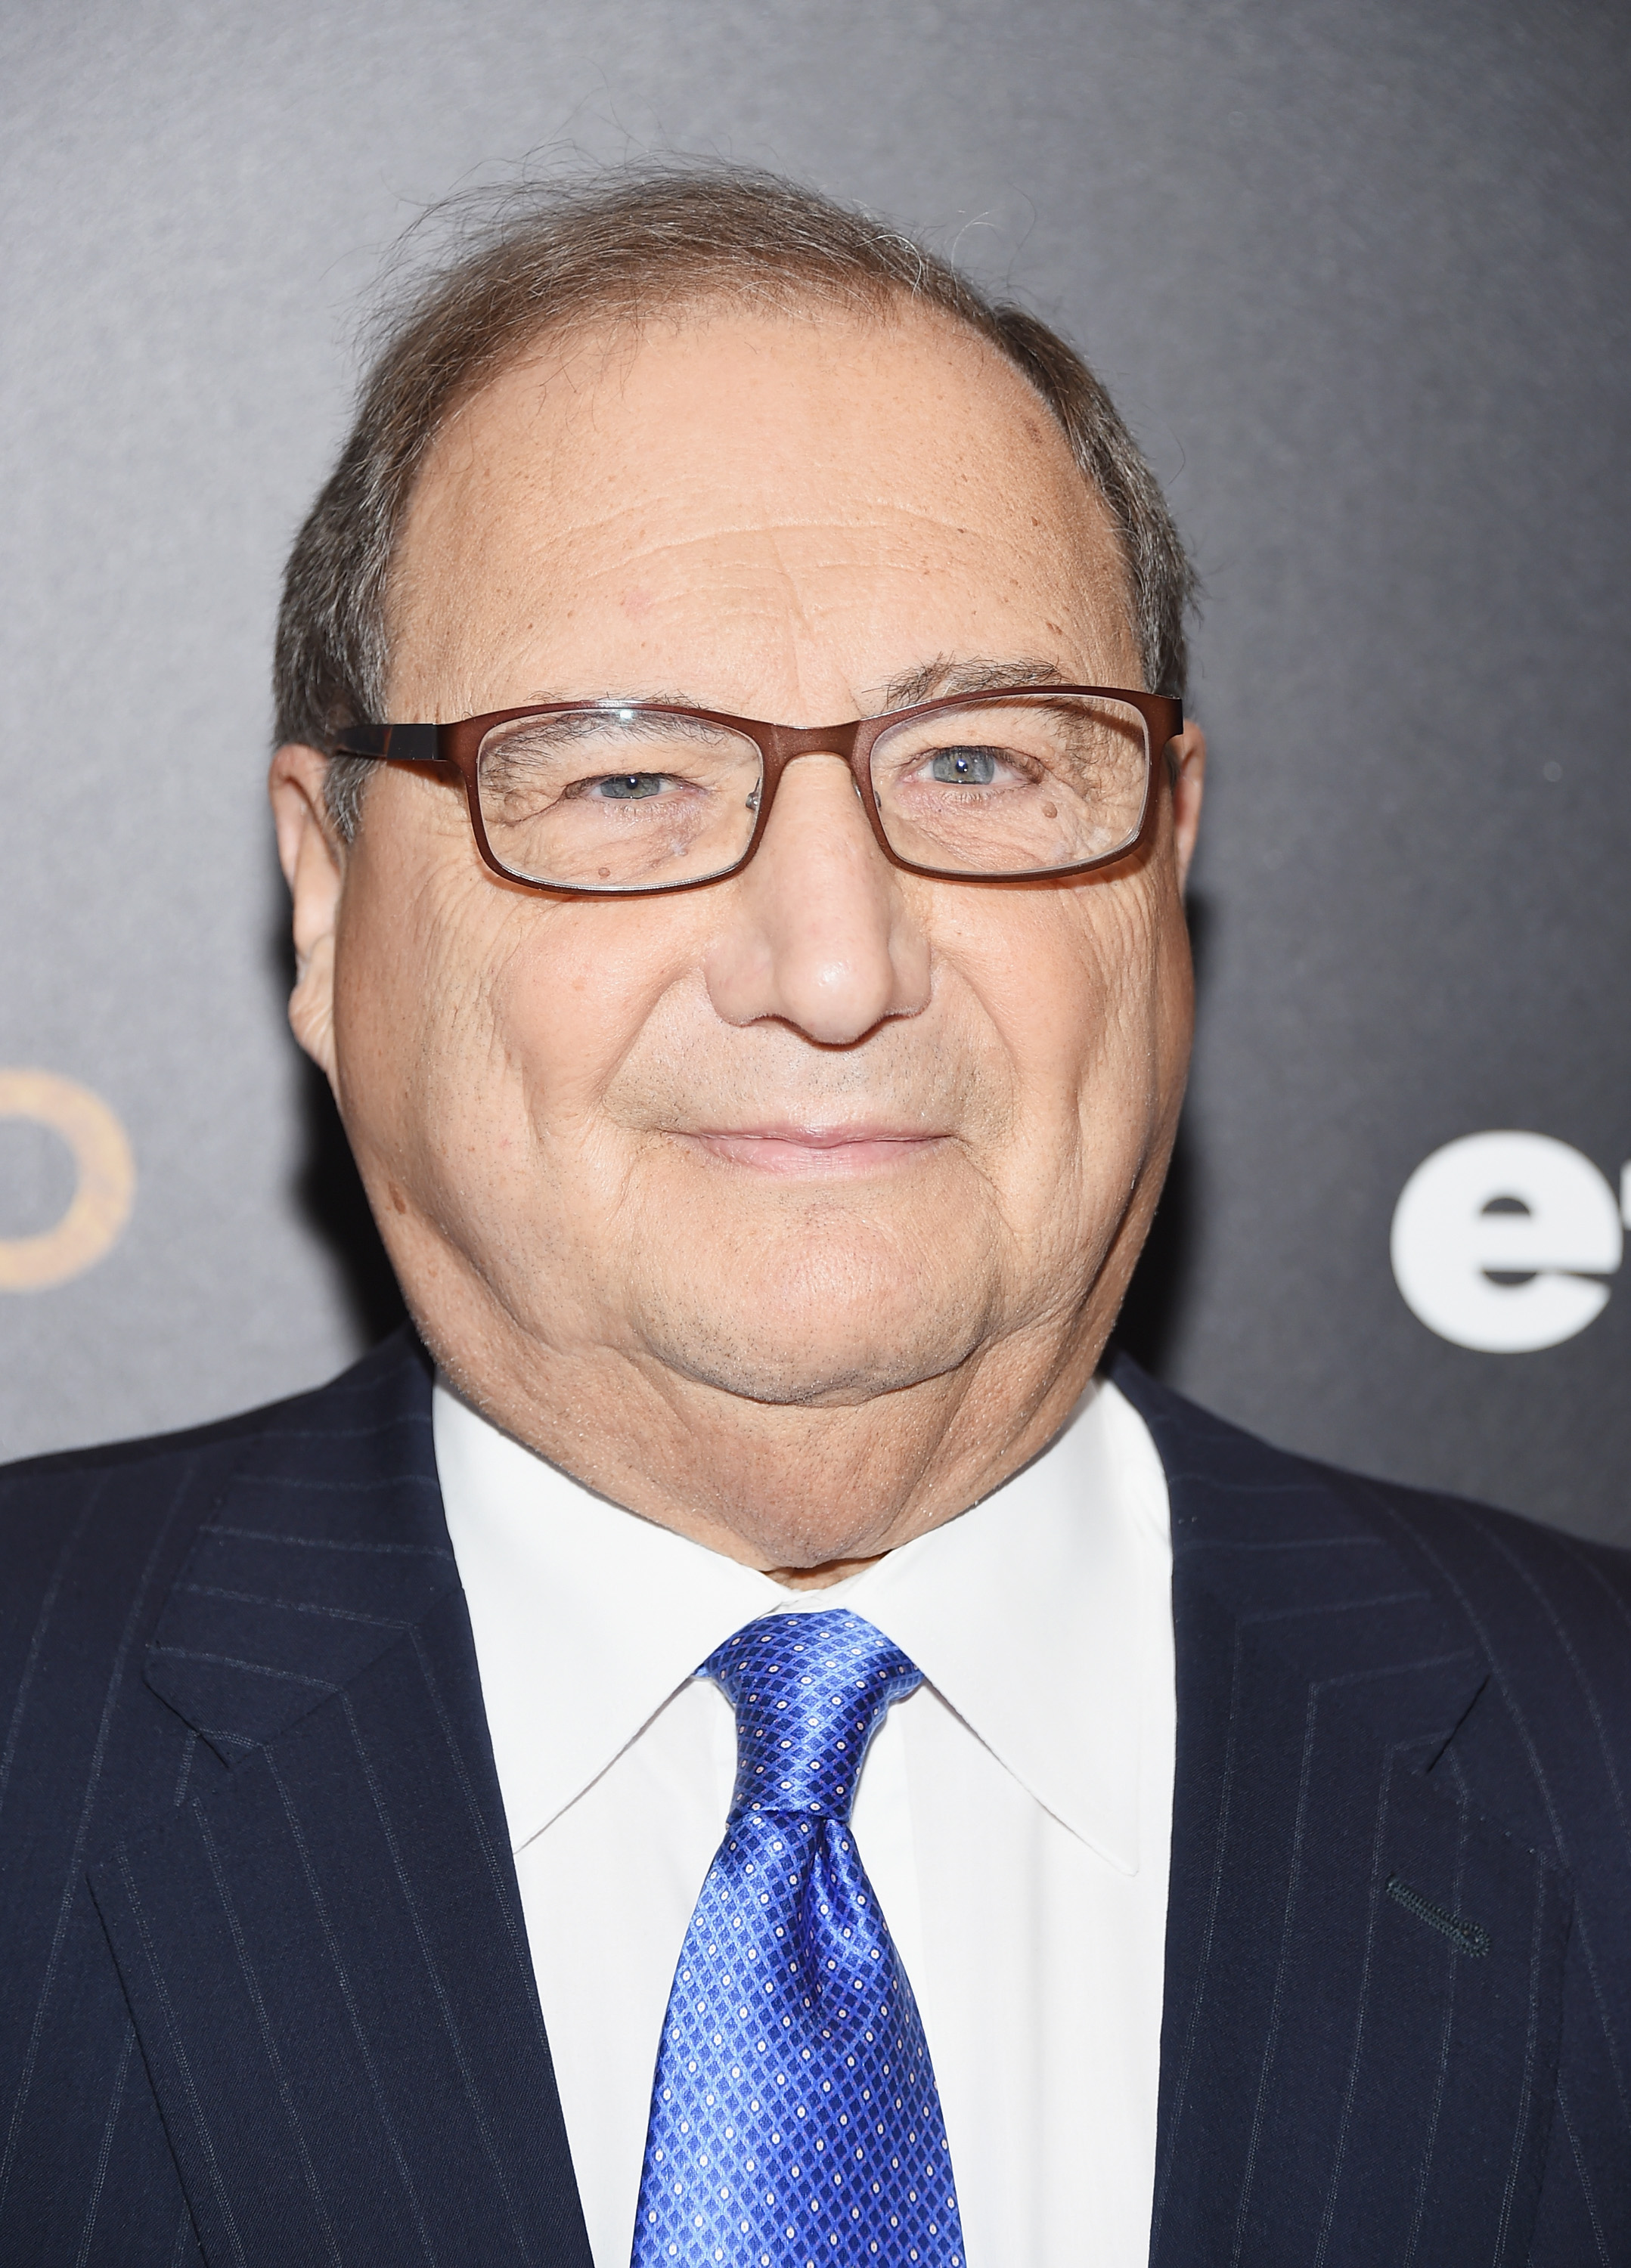 Anti-Defamation League director Abraham 'Abe' Foxman attends the 'Woman In Gold' New York premiere at The Museum of Modern Art on March 30, 2015 in New York City.